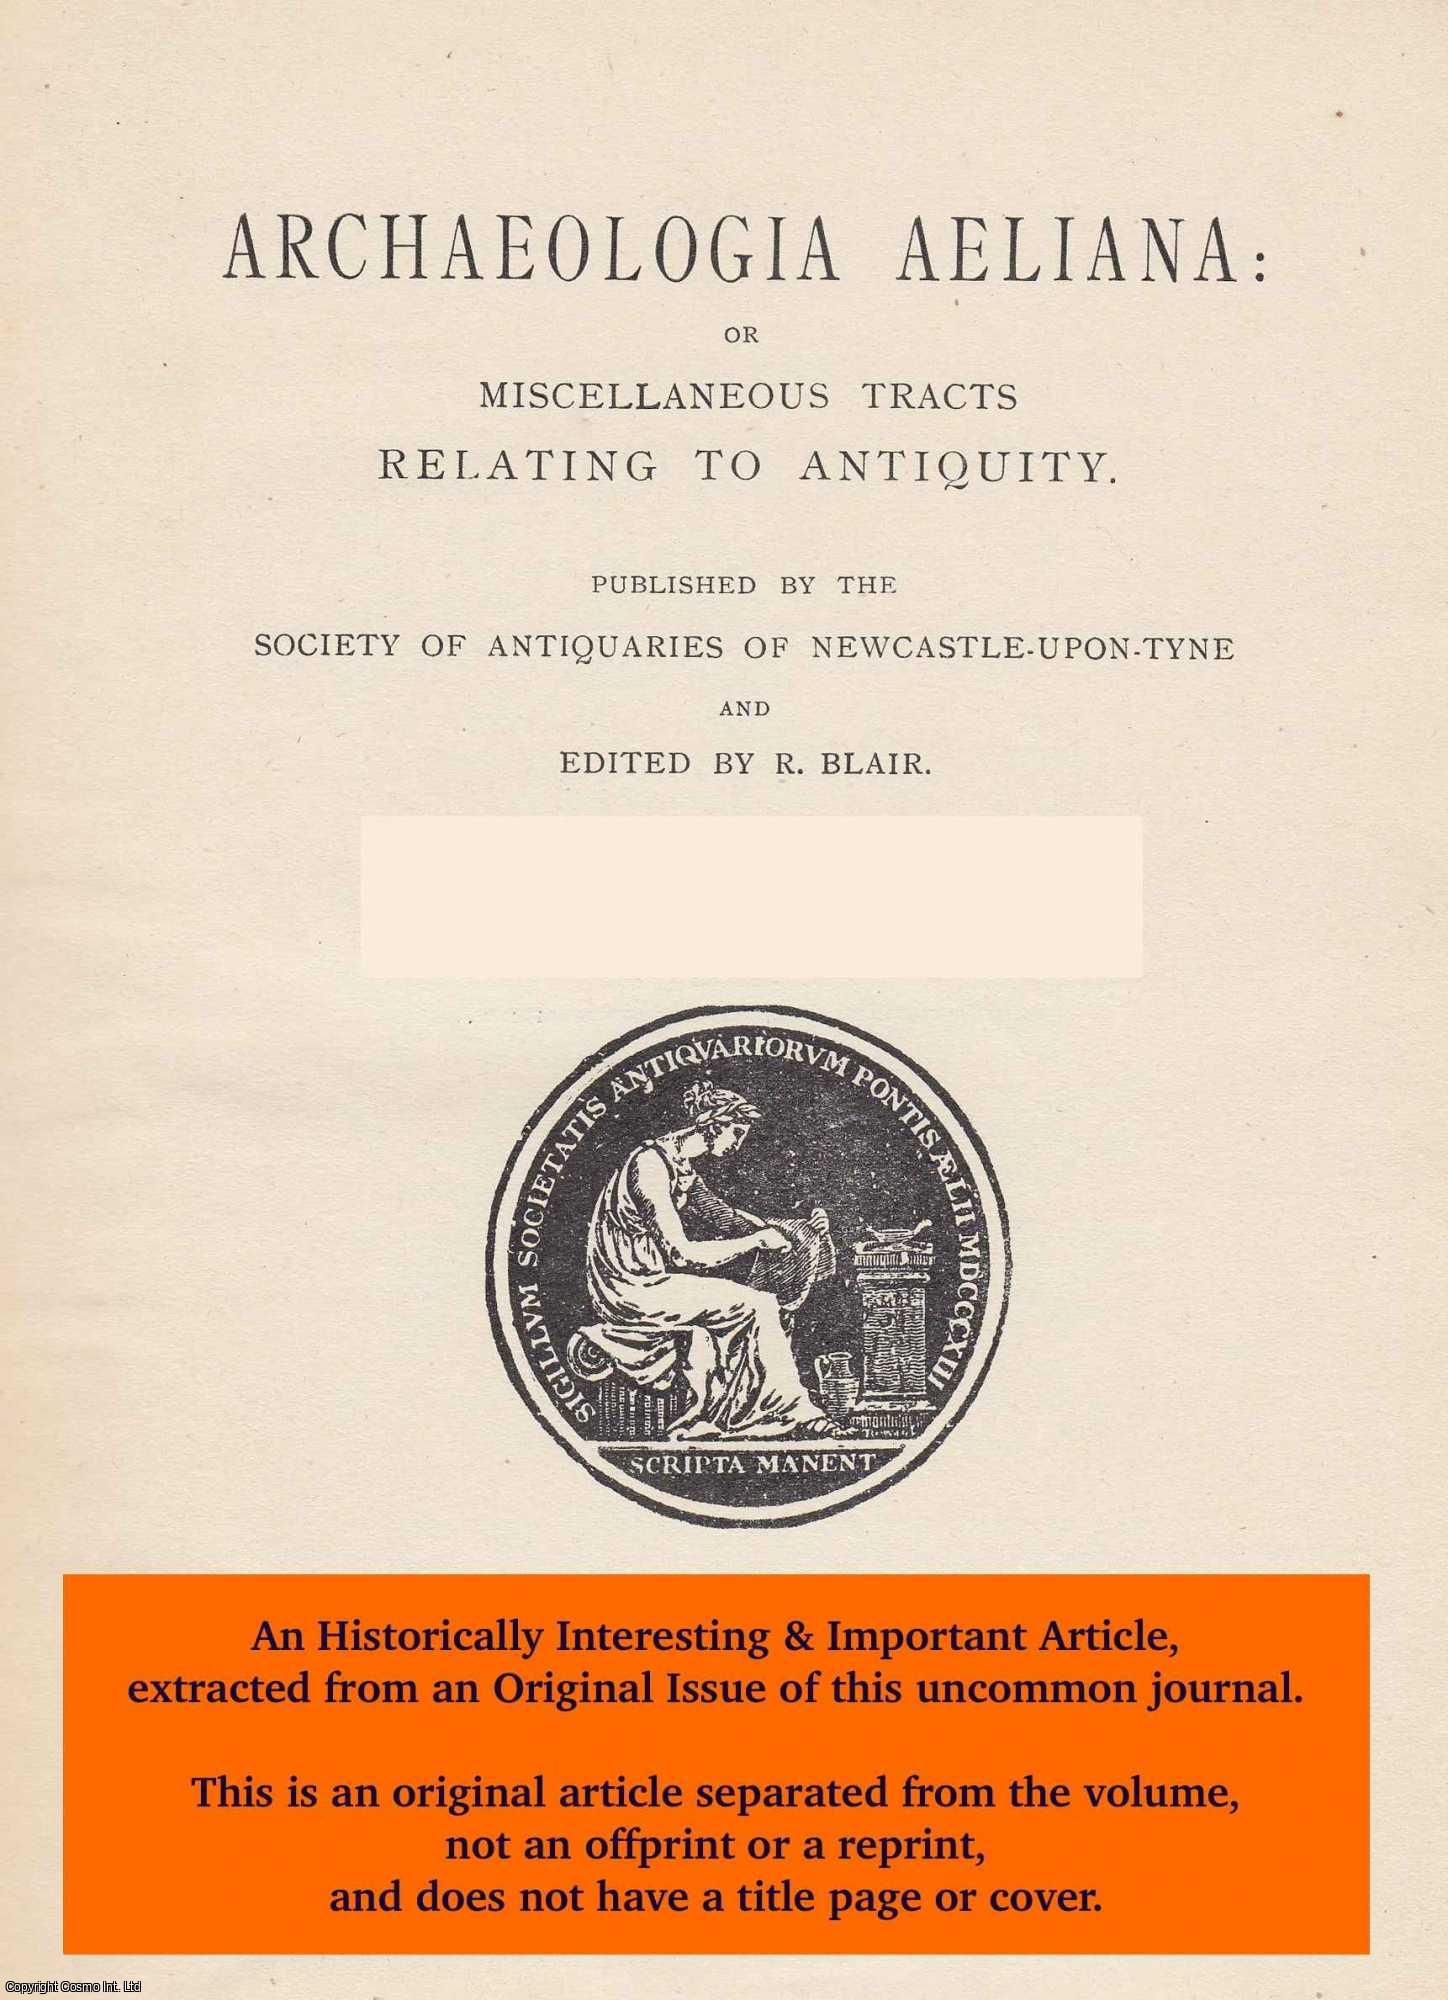 Madeleine Hope Dodds, Madeleine Hope - The Little Book of The Birth of St. Cuthbert. Commonly Called The Irish Life of St. Cuthbert. An original article from The Archaeologia Aeliana: or Miscellaneous Tracts Relating to Antiquity, 1929.